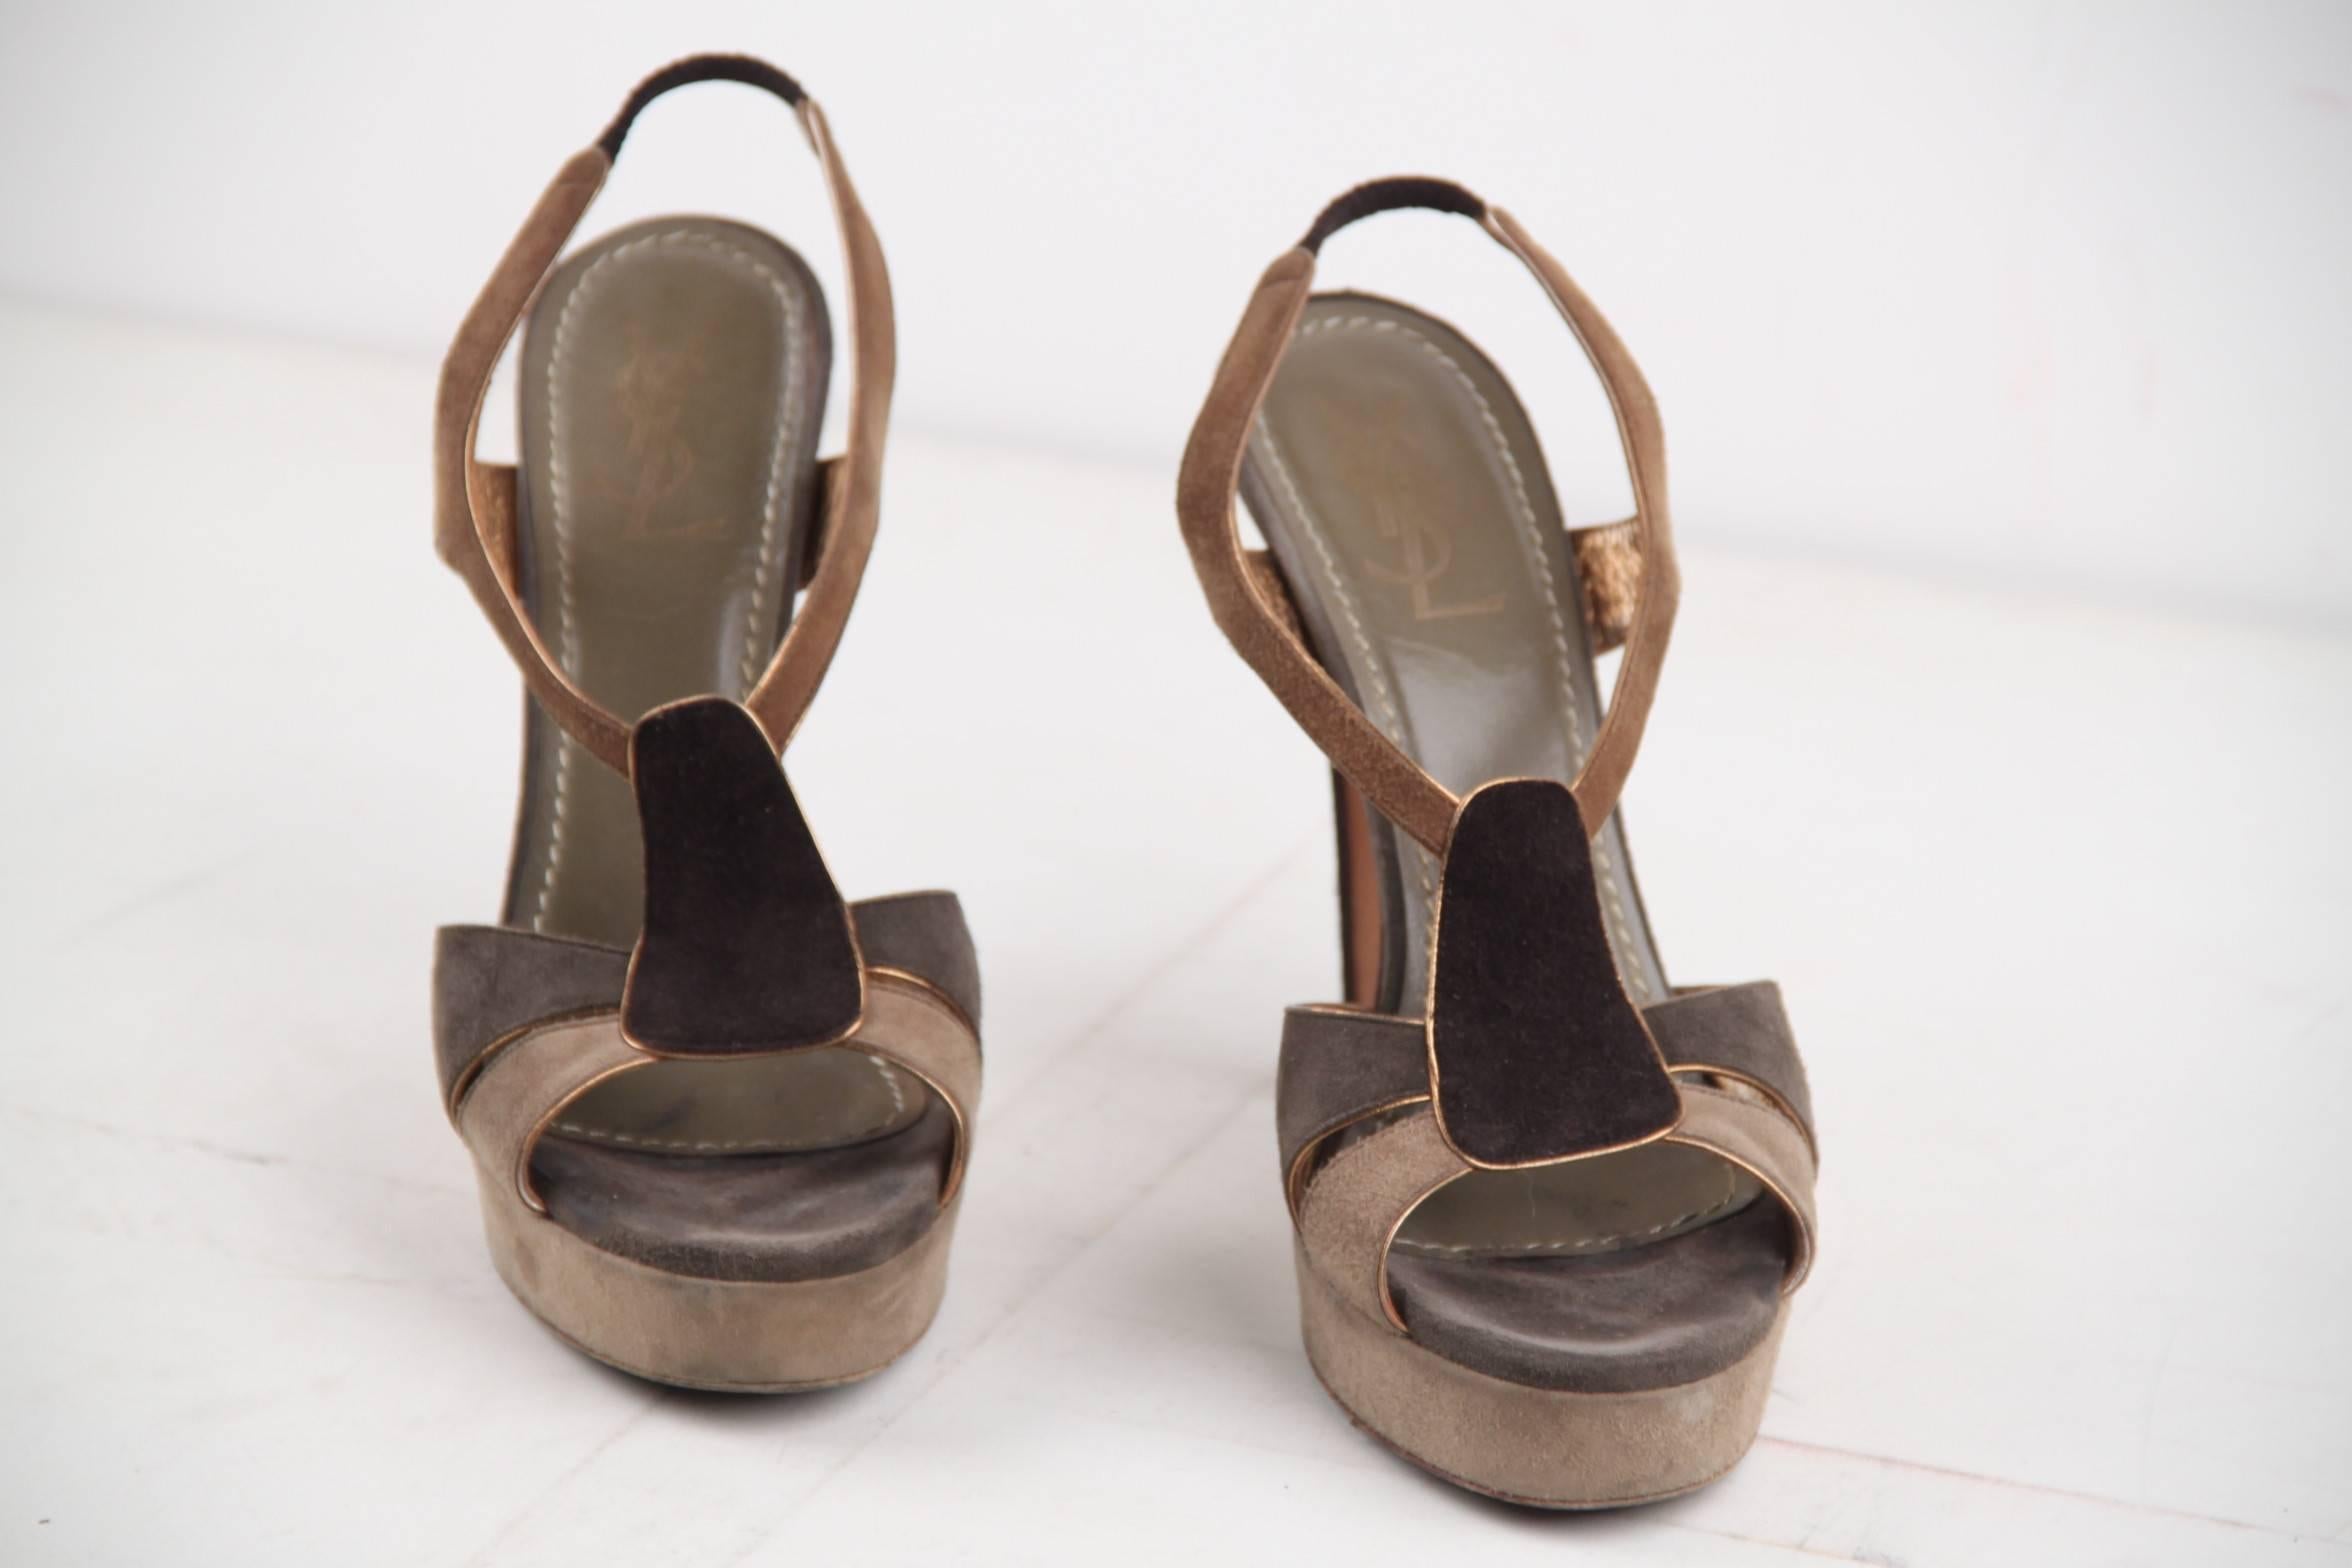 YVES SAINT LAURENT Tan & Gray Suede SANDALS PUMPS Heels SHOES Size 39 1/2 In Good Condition In Rome, Rome